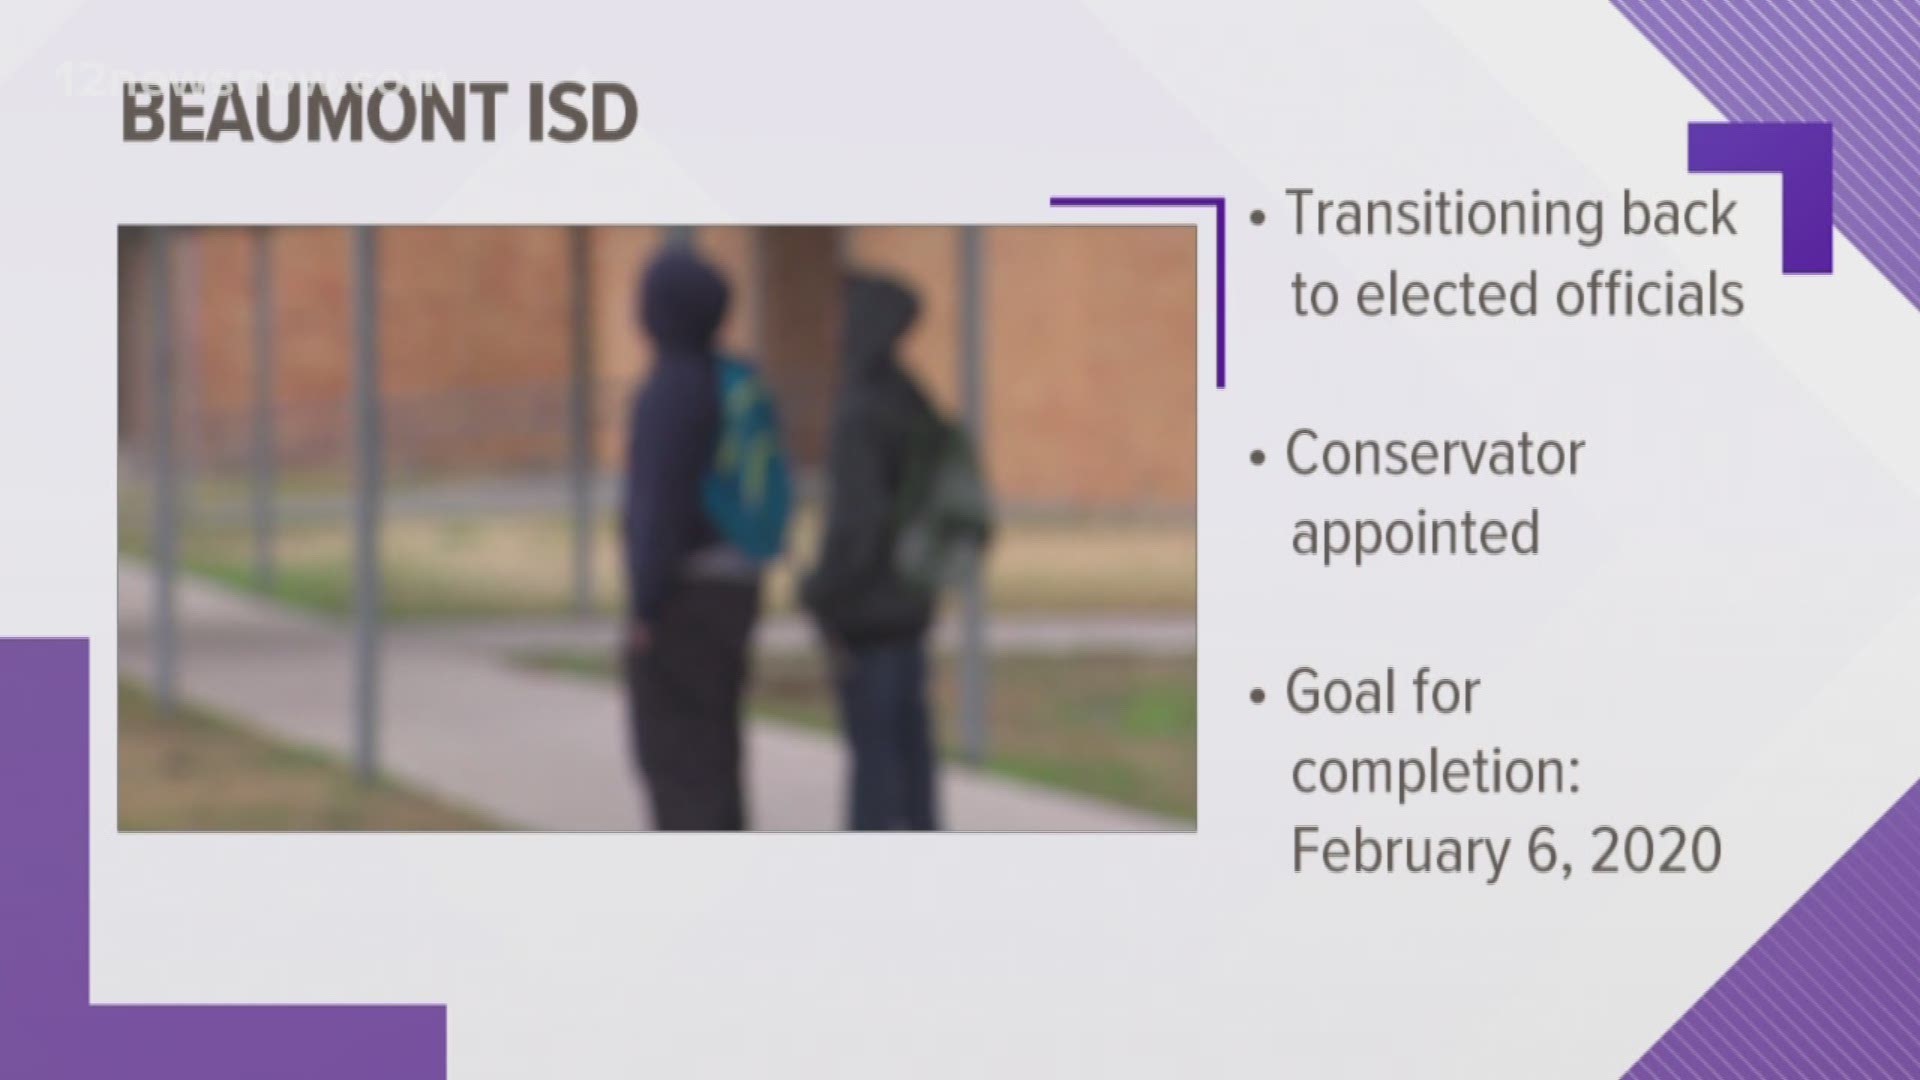 A Beaumont ISD spokesperson said the conservator has been appointed.